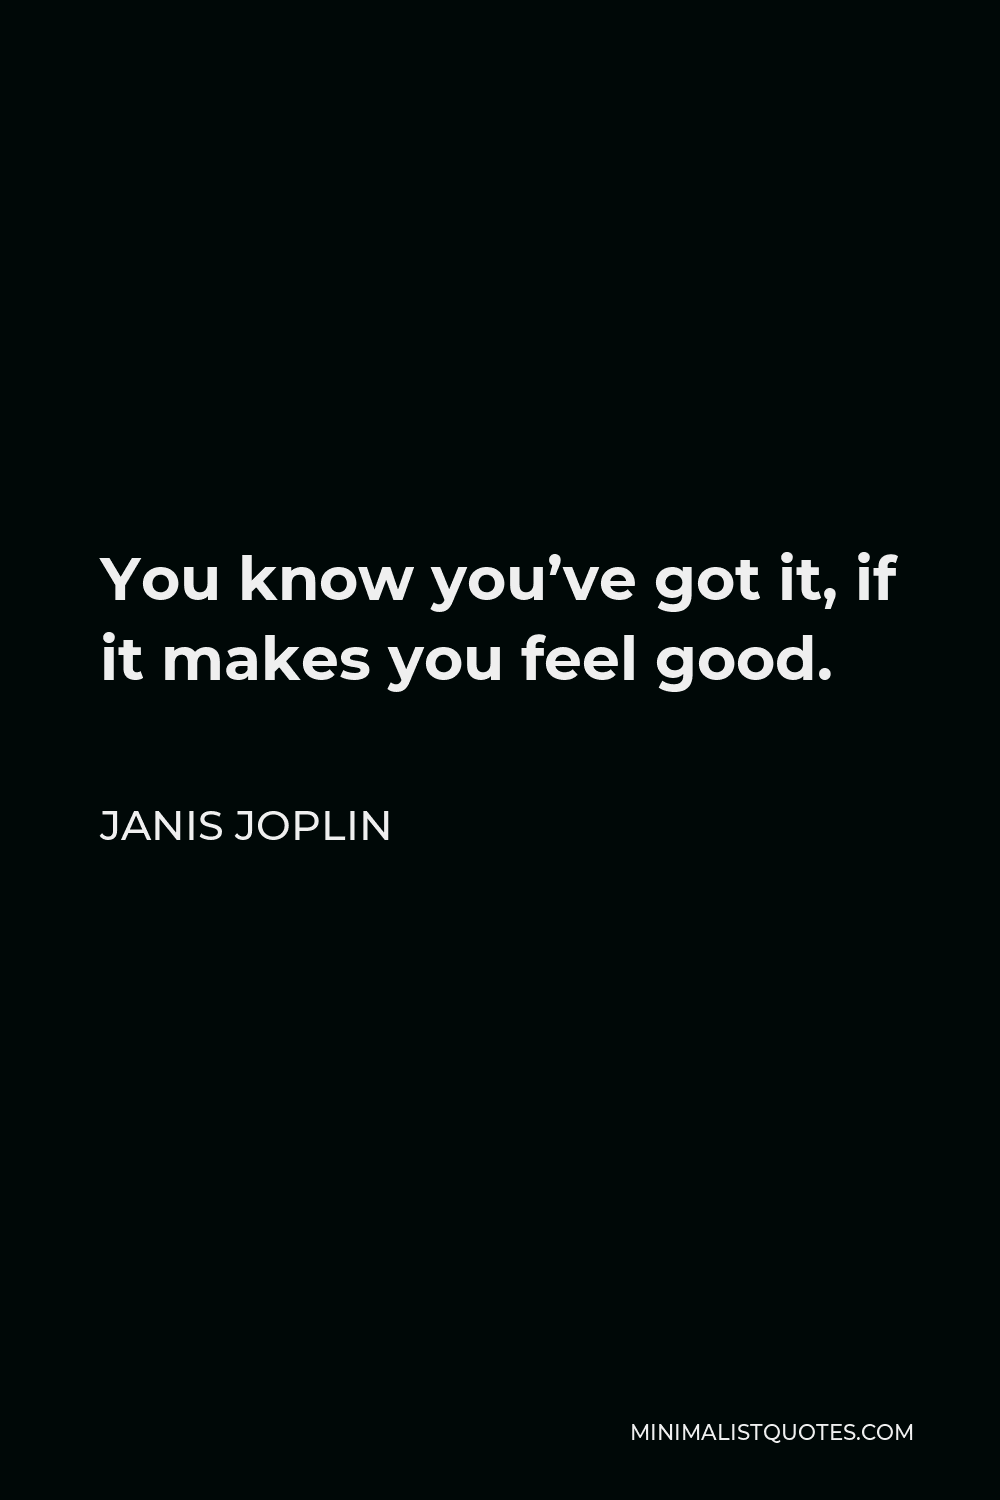 Janis Joplin Quote - You know you’ve got it, if it makes you feel good.